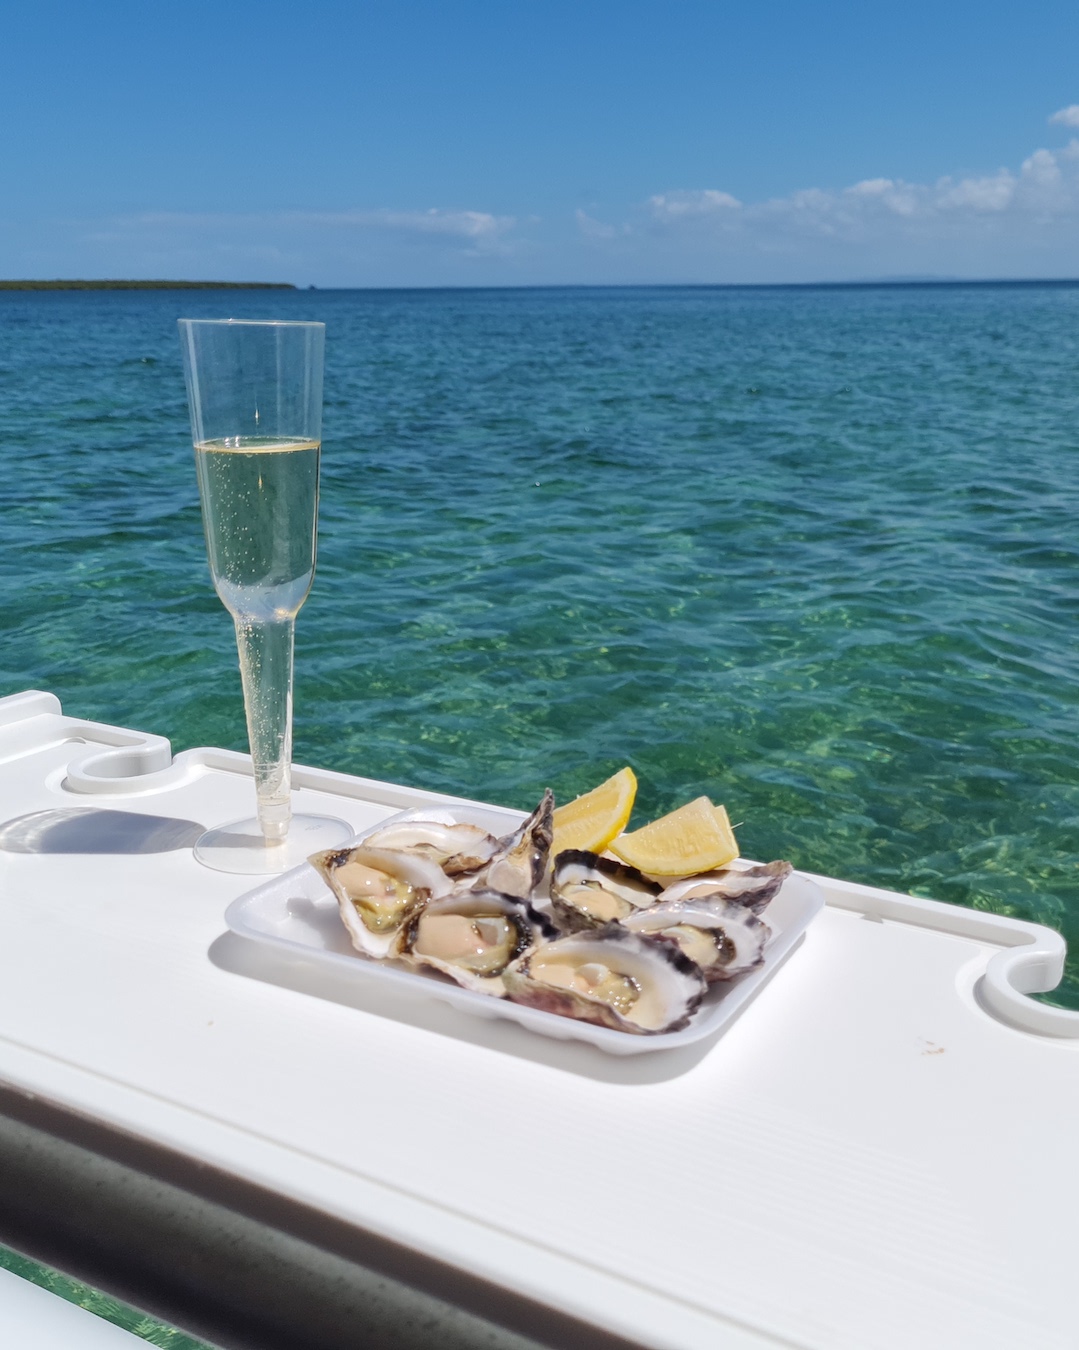 A tray of oysters and glass of champagne on a boat overlooking clear blue ocean.